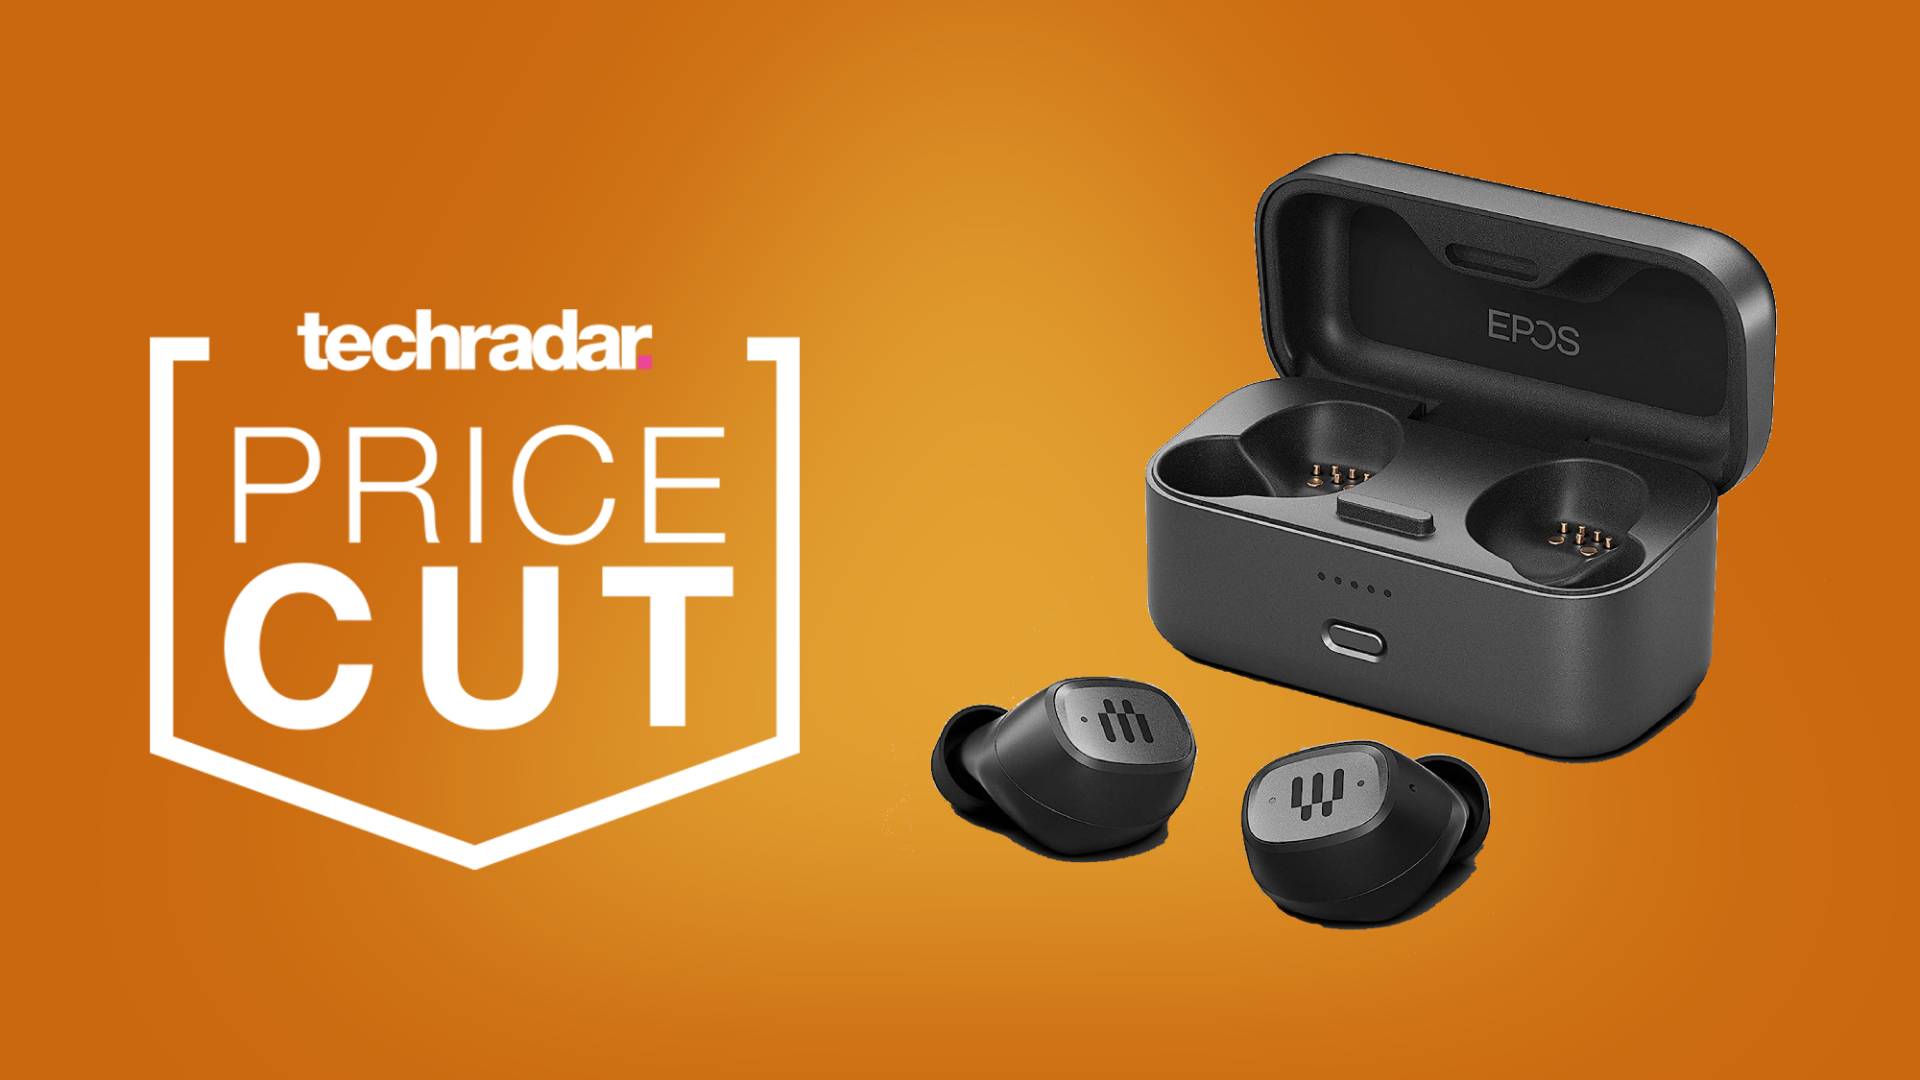 Our favorite gaming earbuds are still at its lowest ever price days after Prime Day